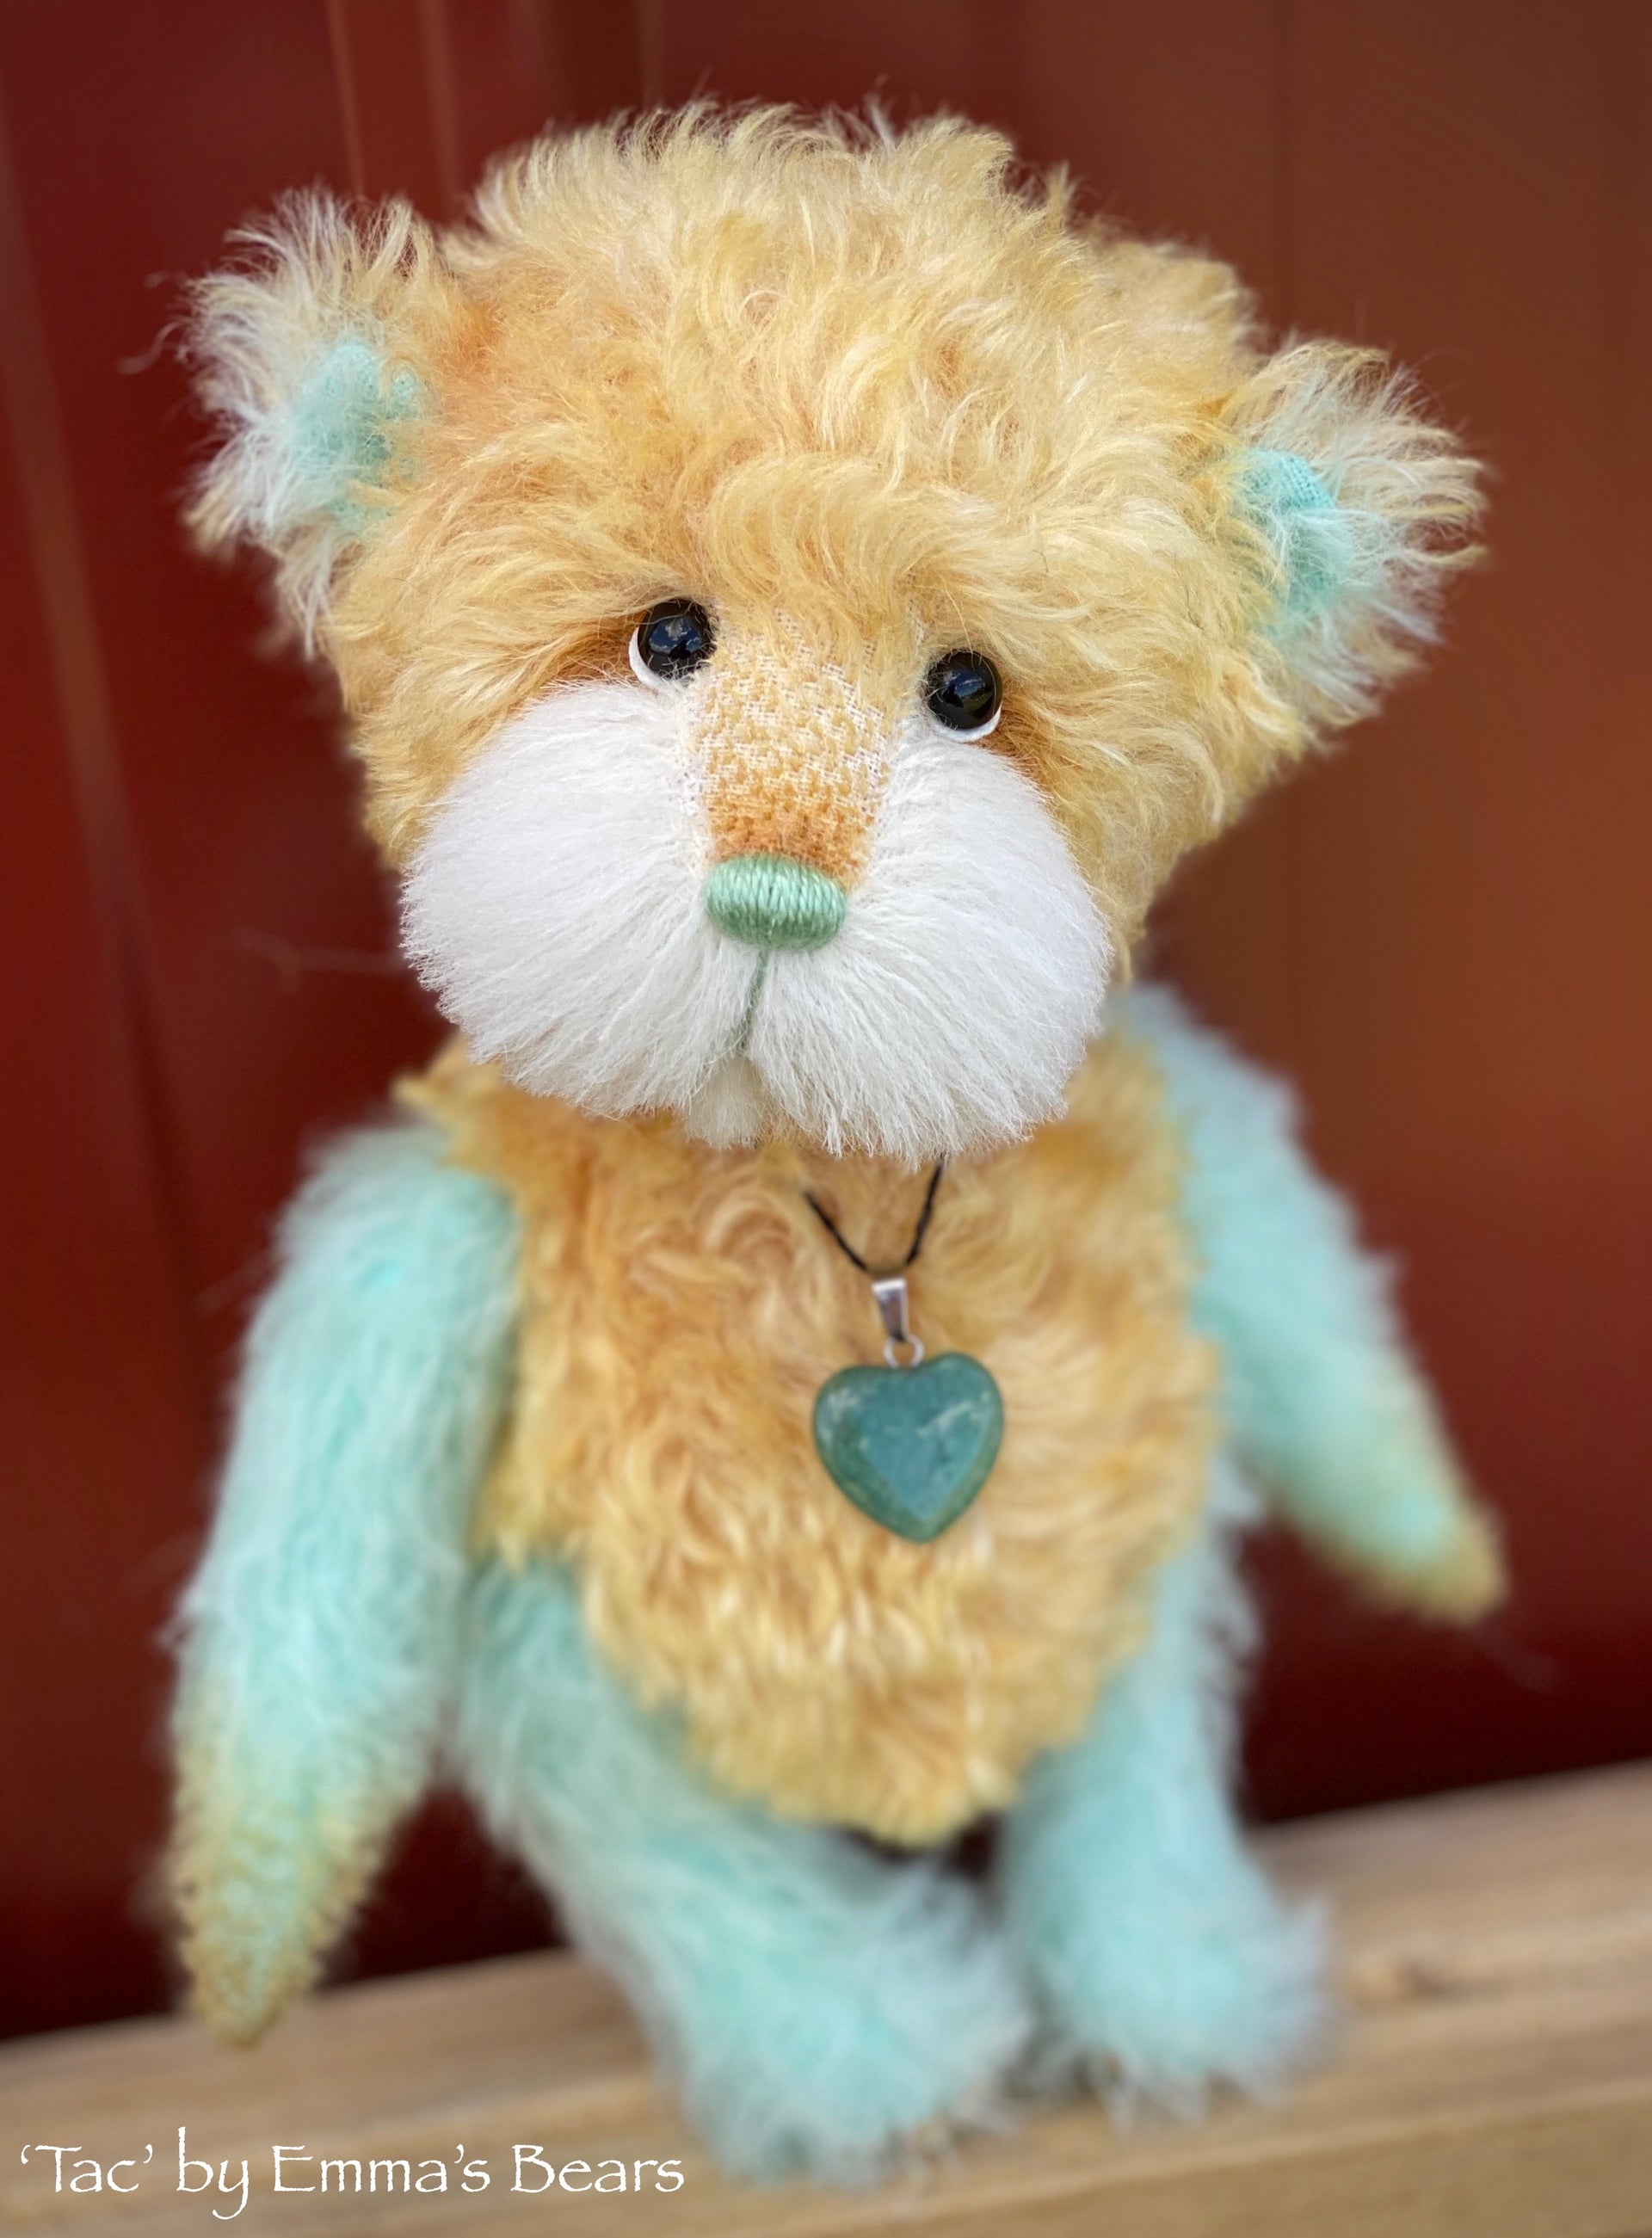 Tac - 8" Hand-Dyed Mohair and Alpaca Artist Bear by Emma's Bears - OOAK in a Limited Series